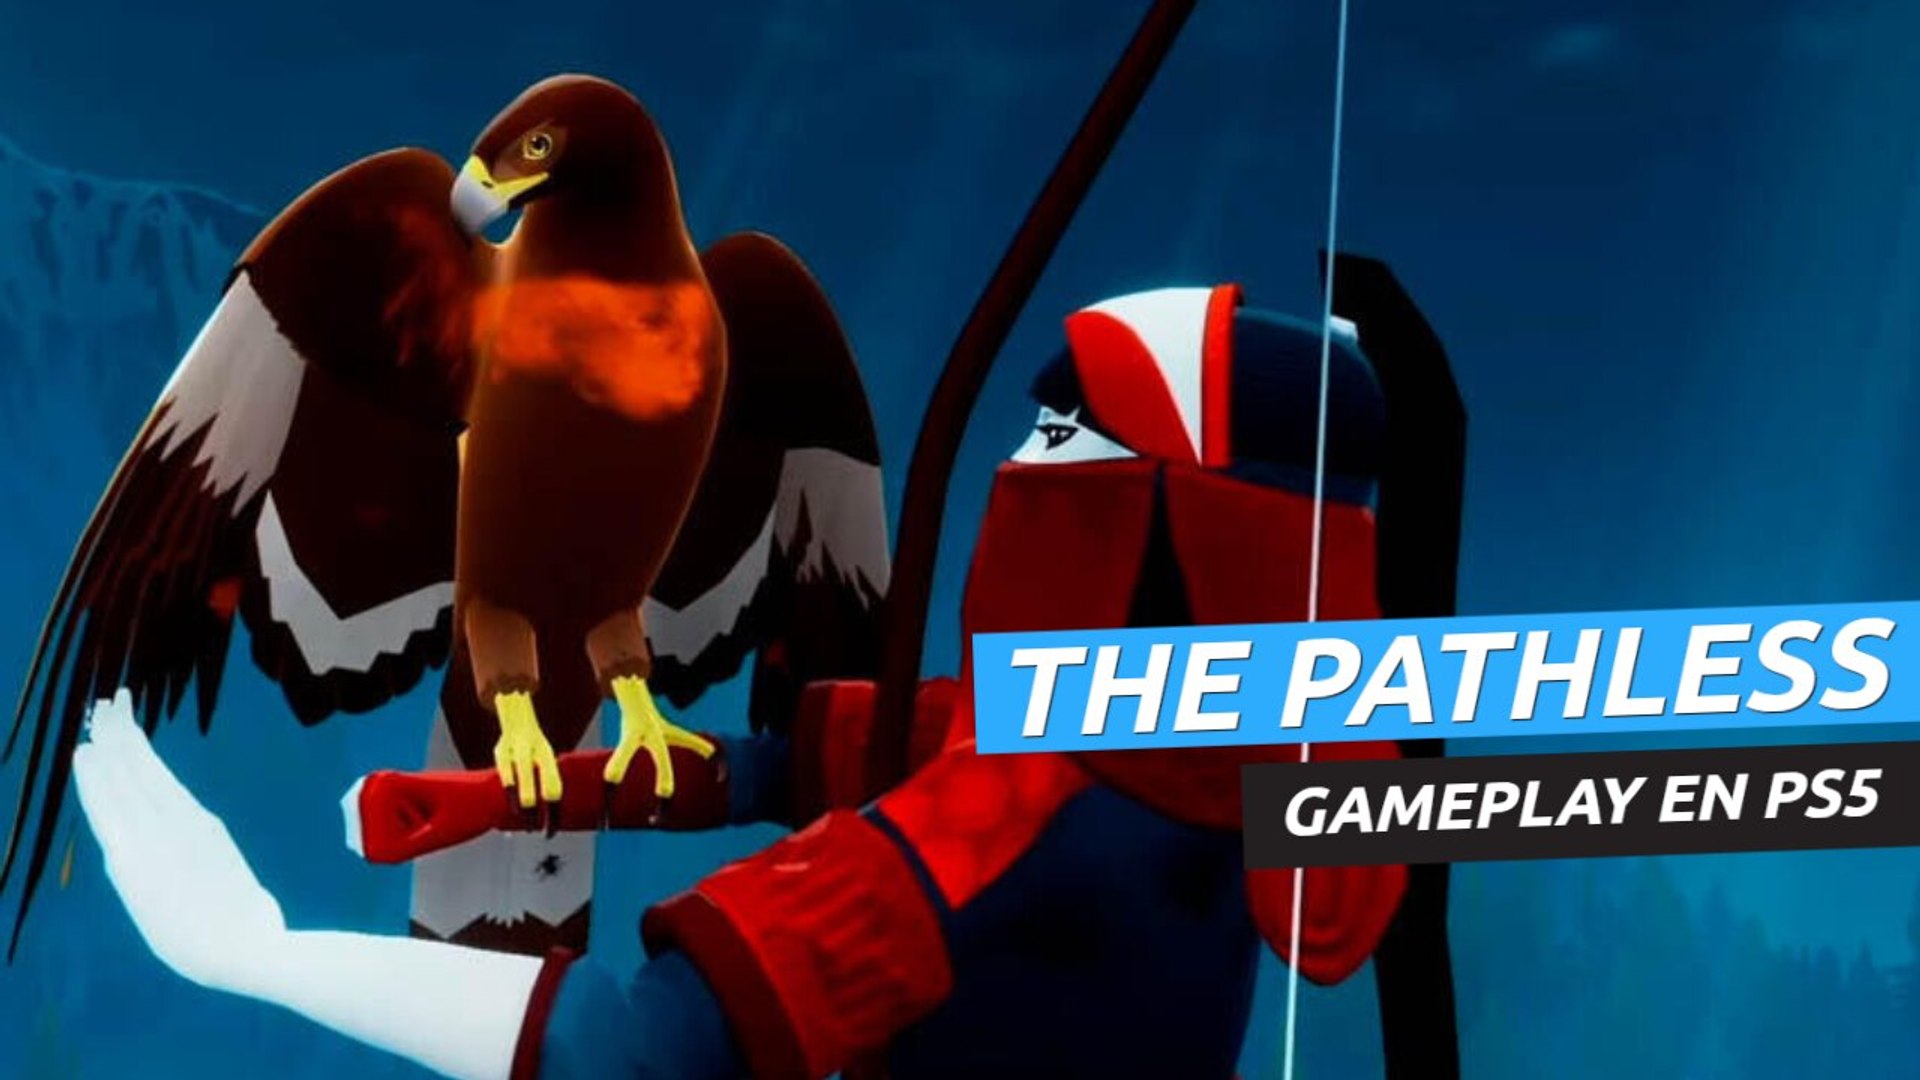 The Pathless - Gameplay en PS5